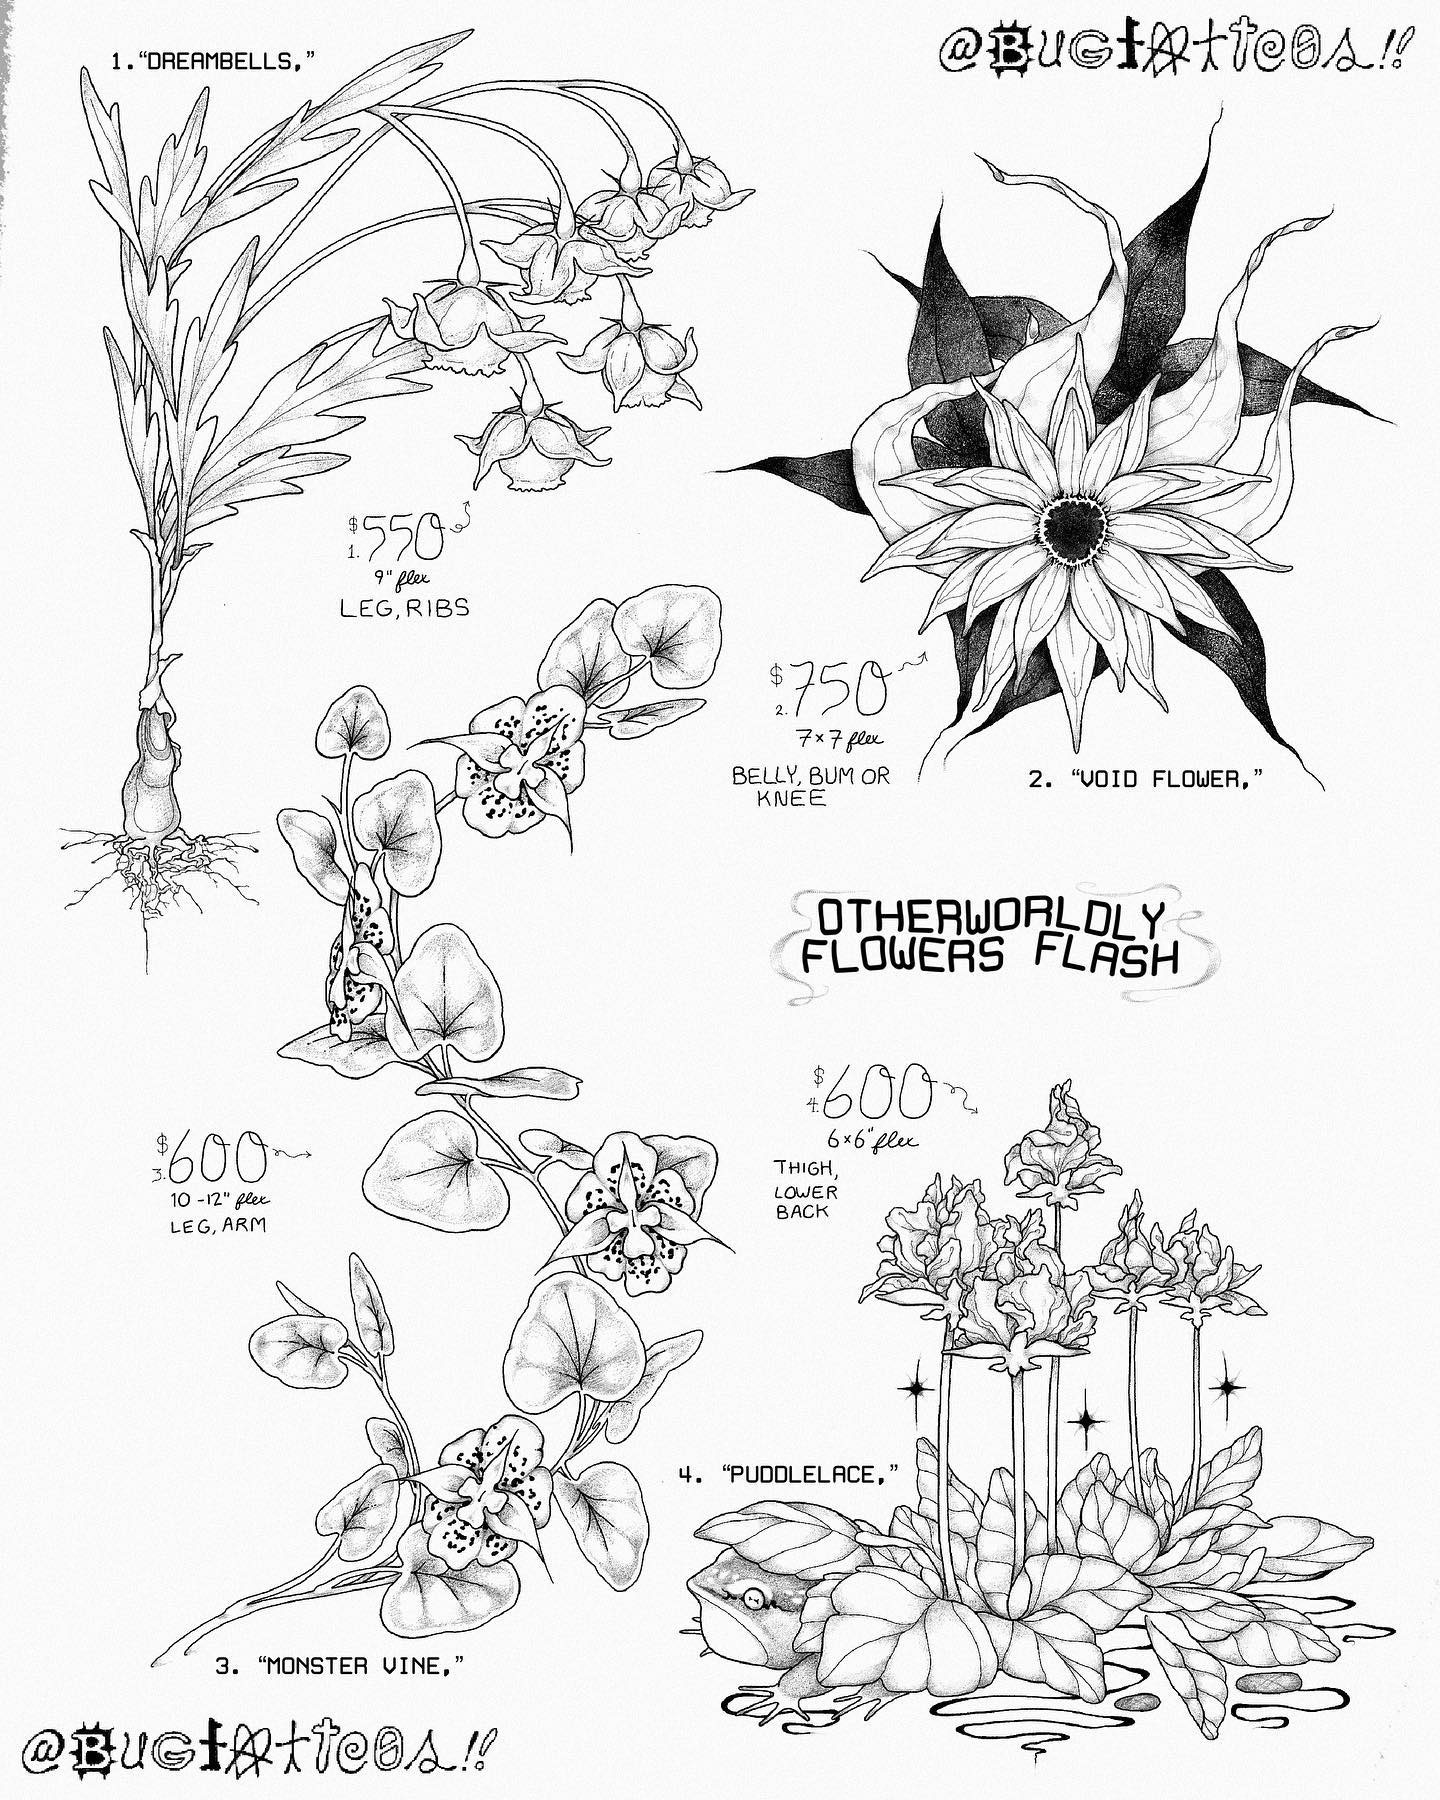 A flash sheet by bag of imagined flowers it is titled otherworldly flowers Flash and has four designs the first is titled dream bells listed for 550 suggest 9 inches as a leg or ribs tattoo it has a long, curving shape with elegant mugwort like leaves and exposed roots and bulb its flowers lean off to one side with bells encased by pointy petals and star shaped stems the second is titled voidflower for the belly knee or bum listed for 750 suggested 7 by 7 inches this design features of a flower with an open mouth like Centre and three layers of long twisting petals overtop black intertwining leaves the design flows in many directions at once pulling you in the third design is titled monster vine offered for 600 suggested 10 to 12 inches on legs or arms it is a long wavy plant with club shaped leaves and speckled freaky orchid like flowers description continued in comments